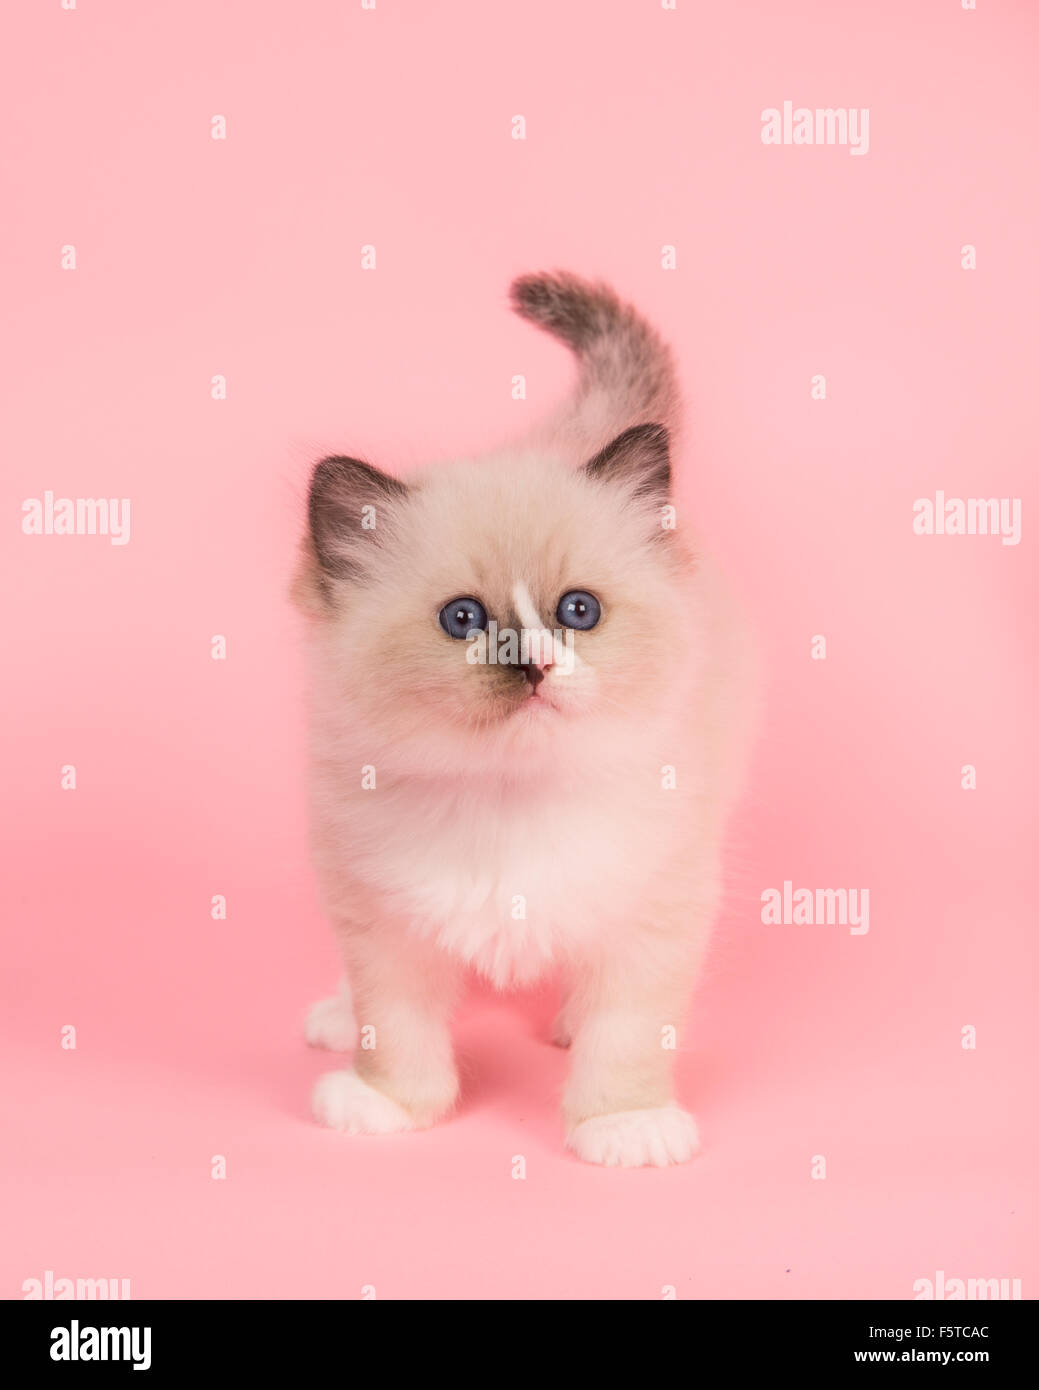 Cute standing ragdoll kitten with blue eyes on a pink background ...